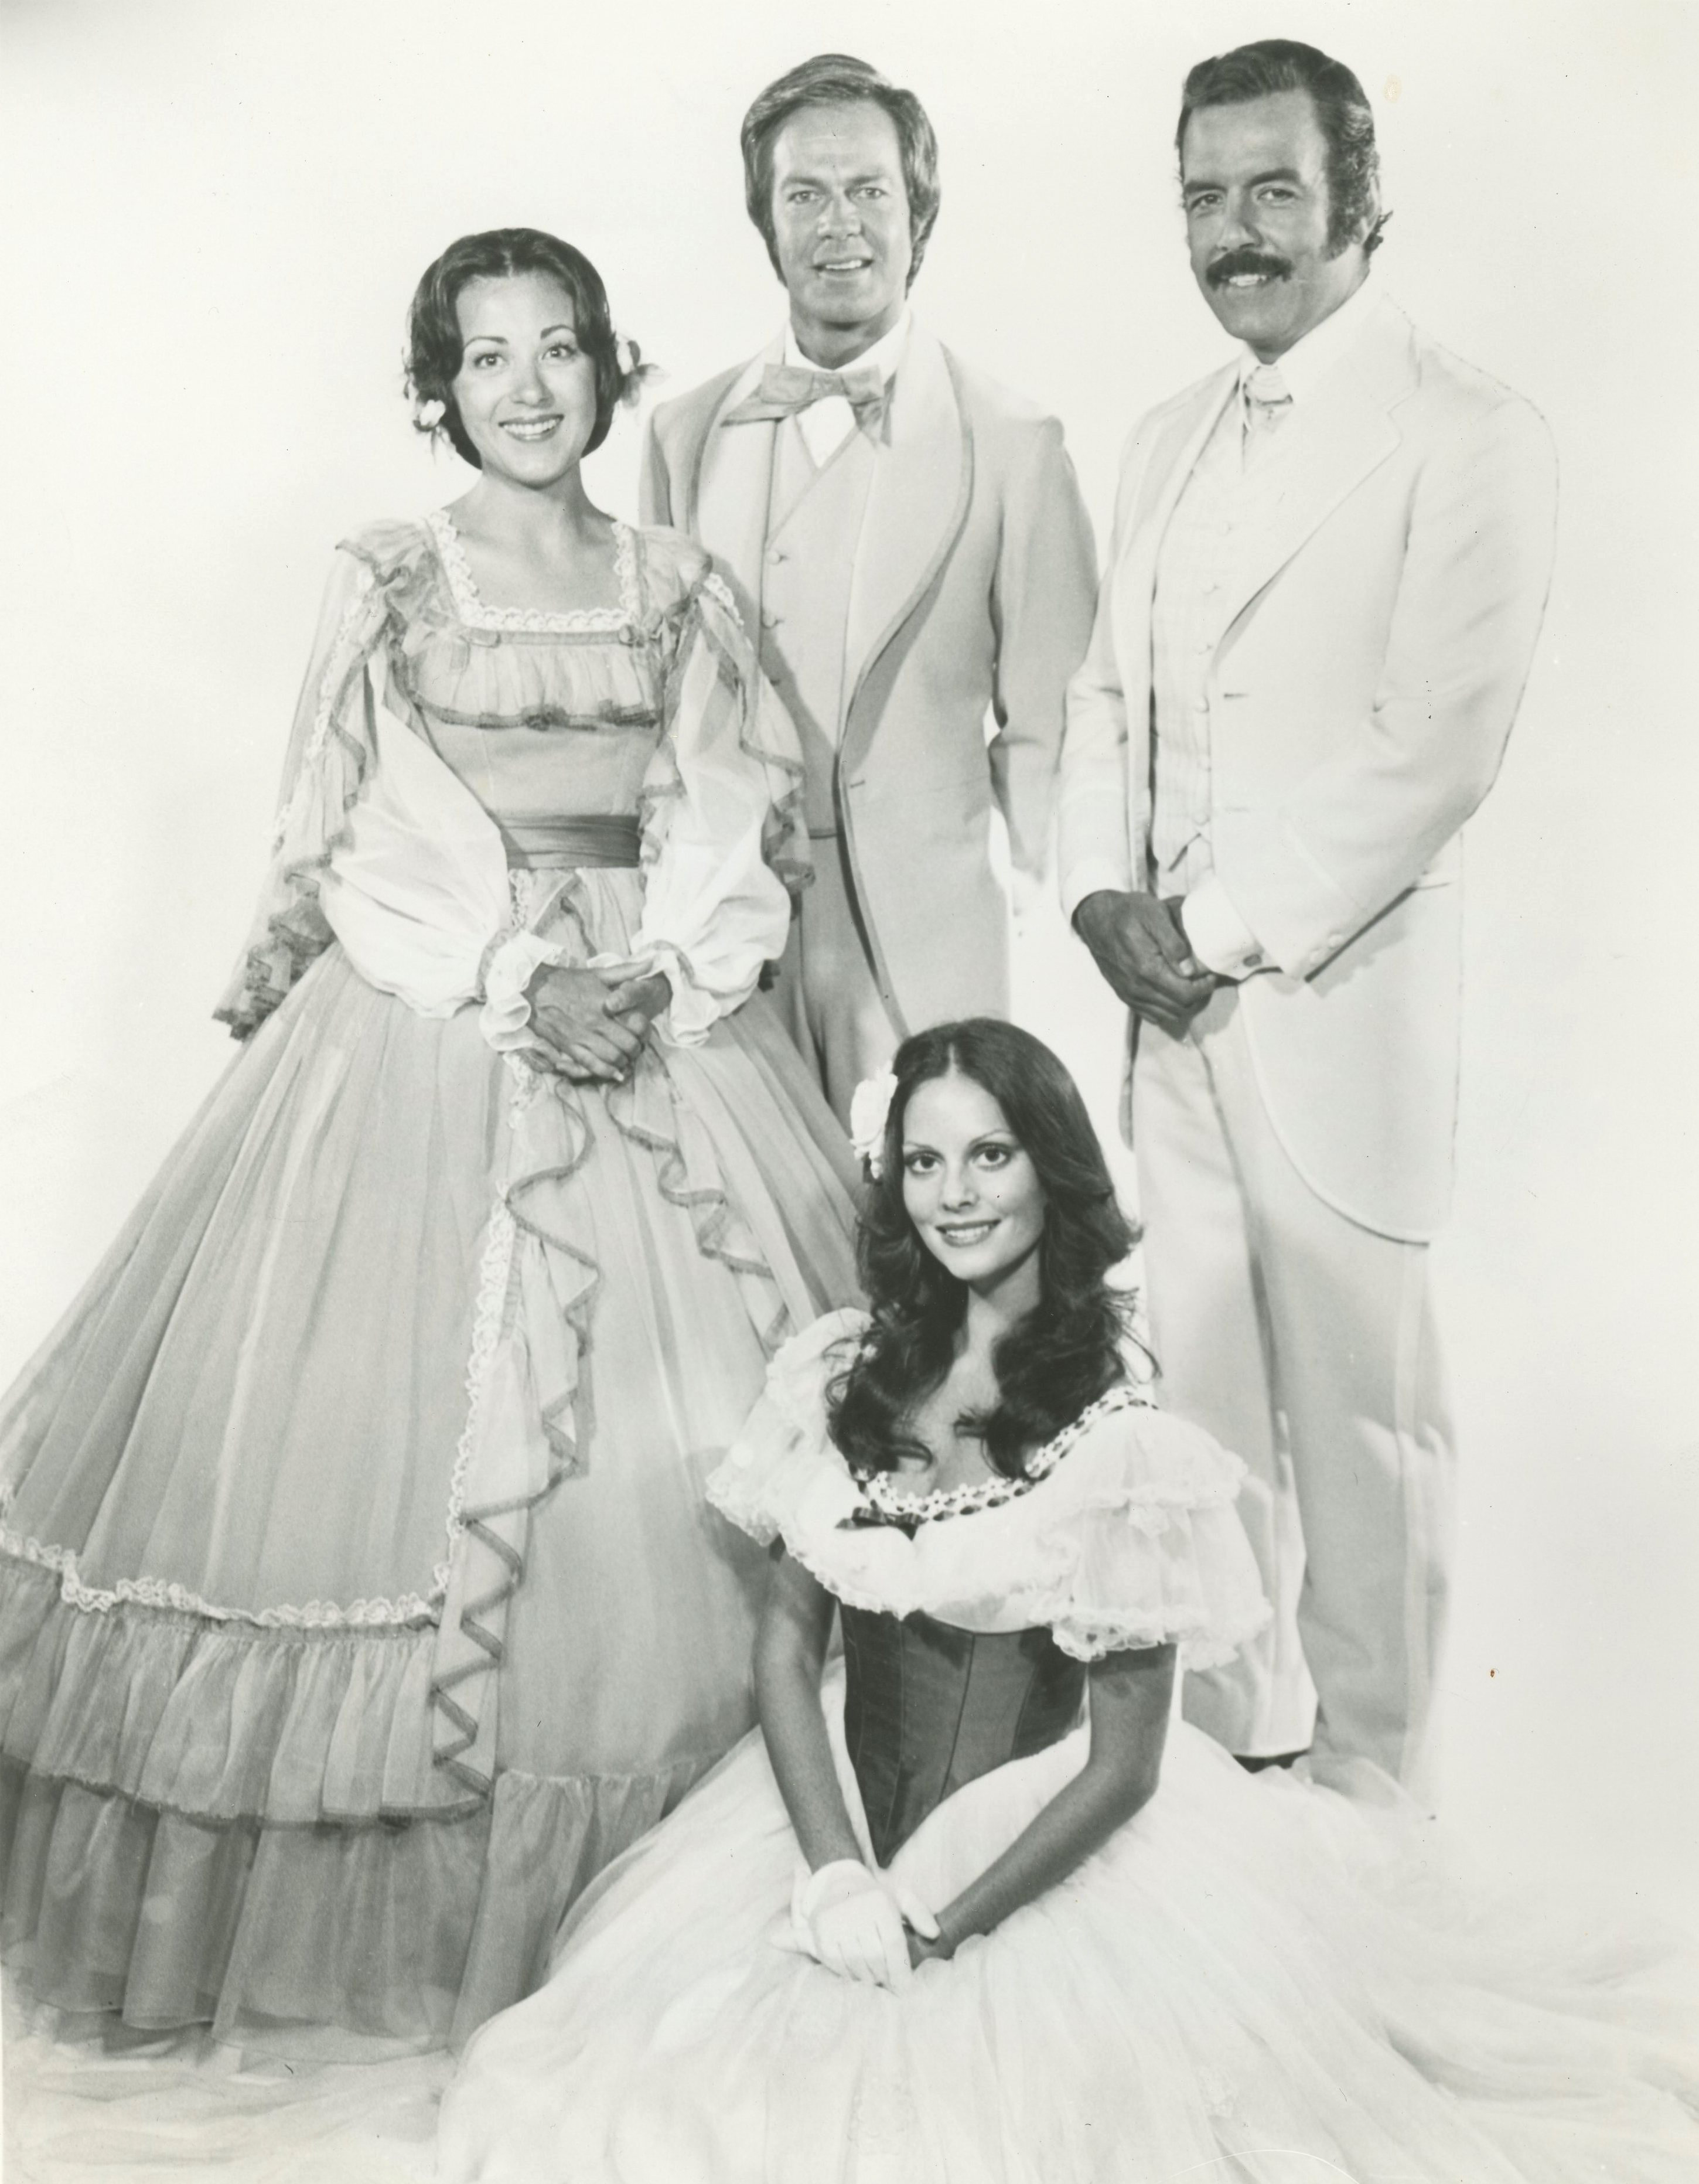 The cast of the stage production of Gone With the Wind, 1973: Udana Power, Terence Monk, Lesley Ann Warren, and Pernell Roberts.